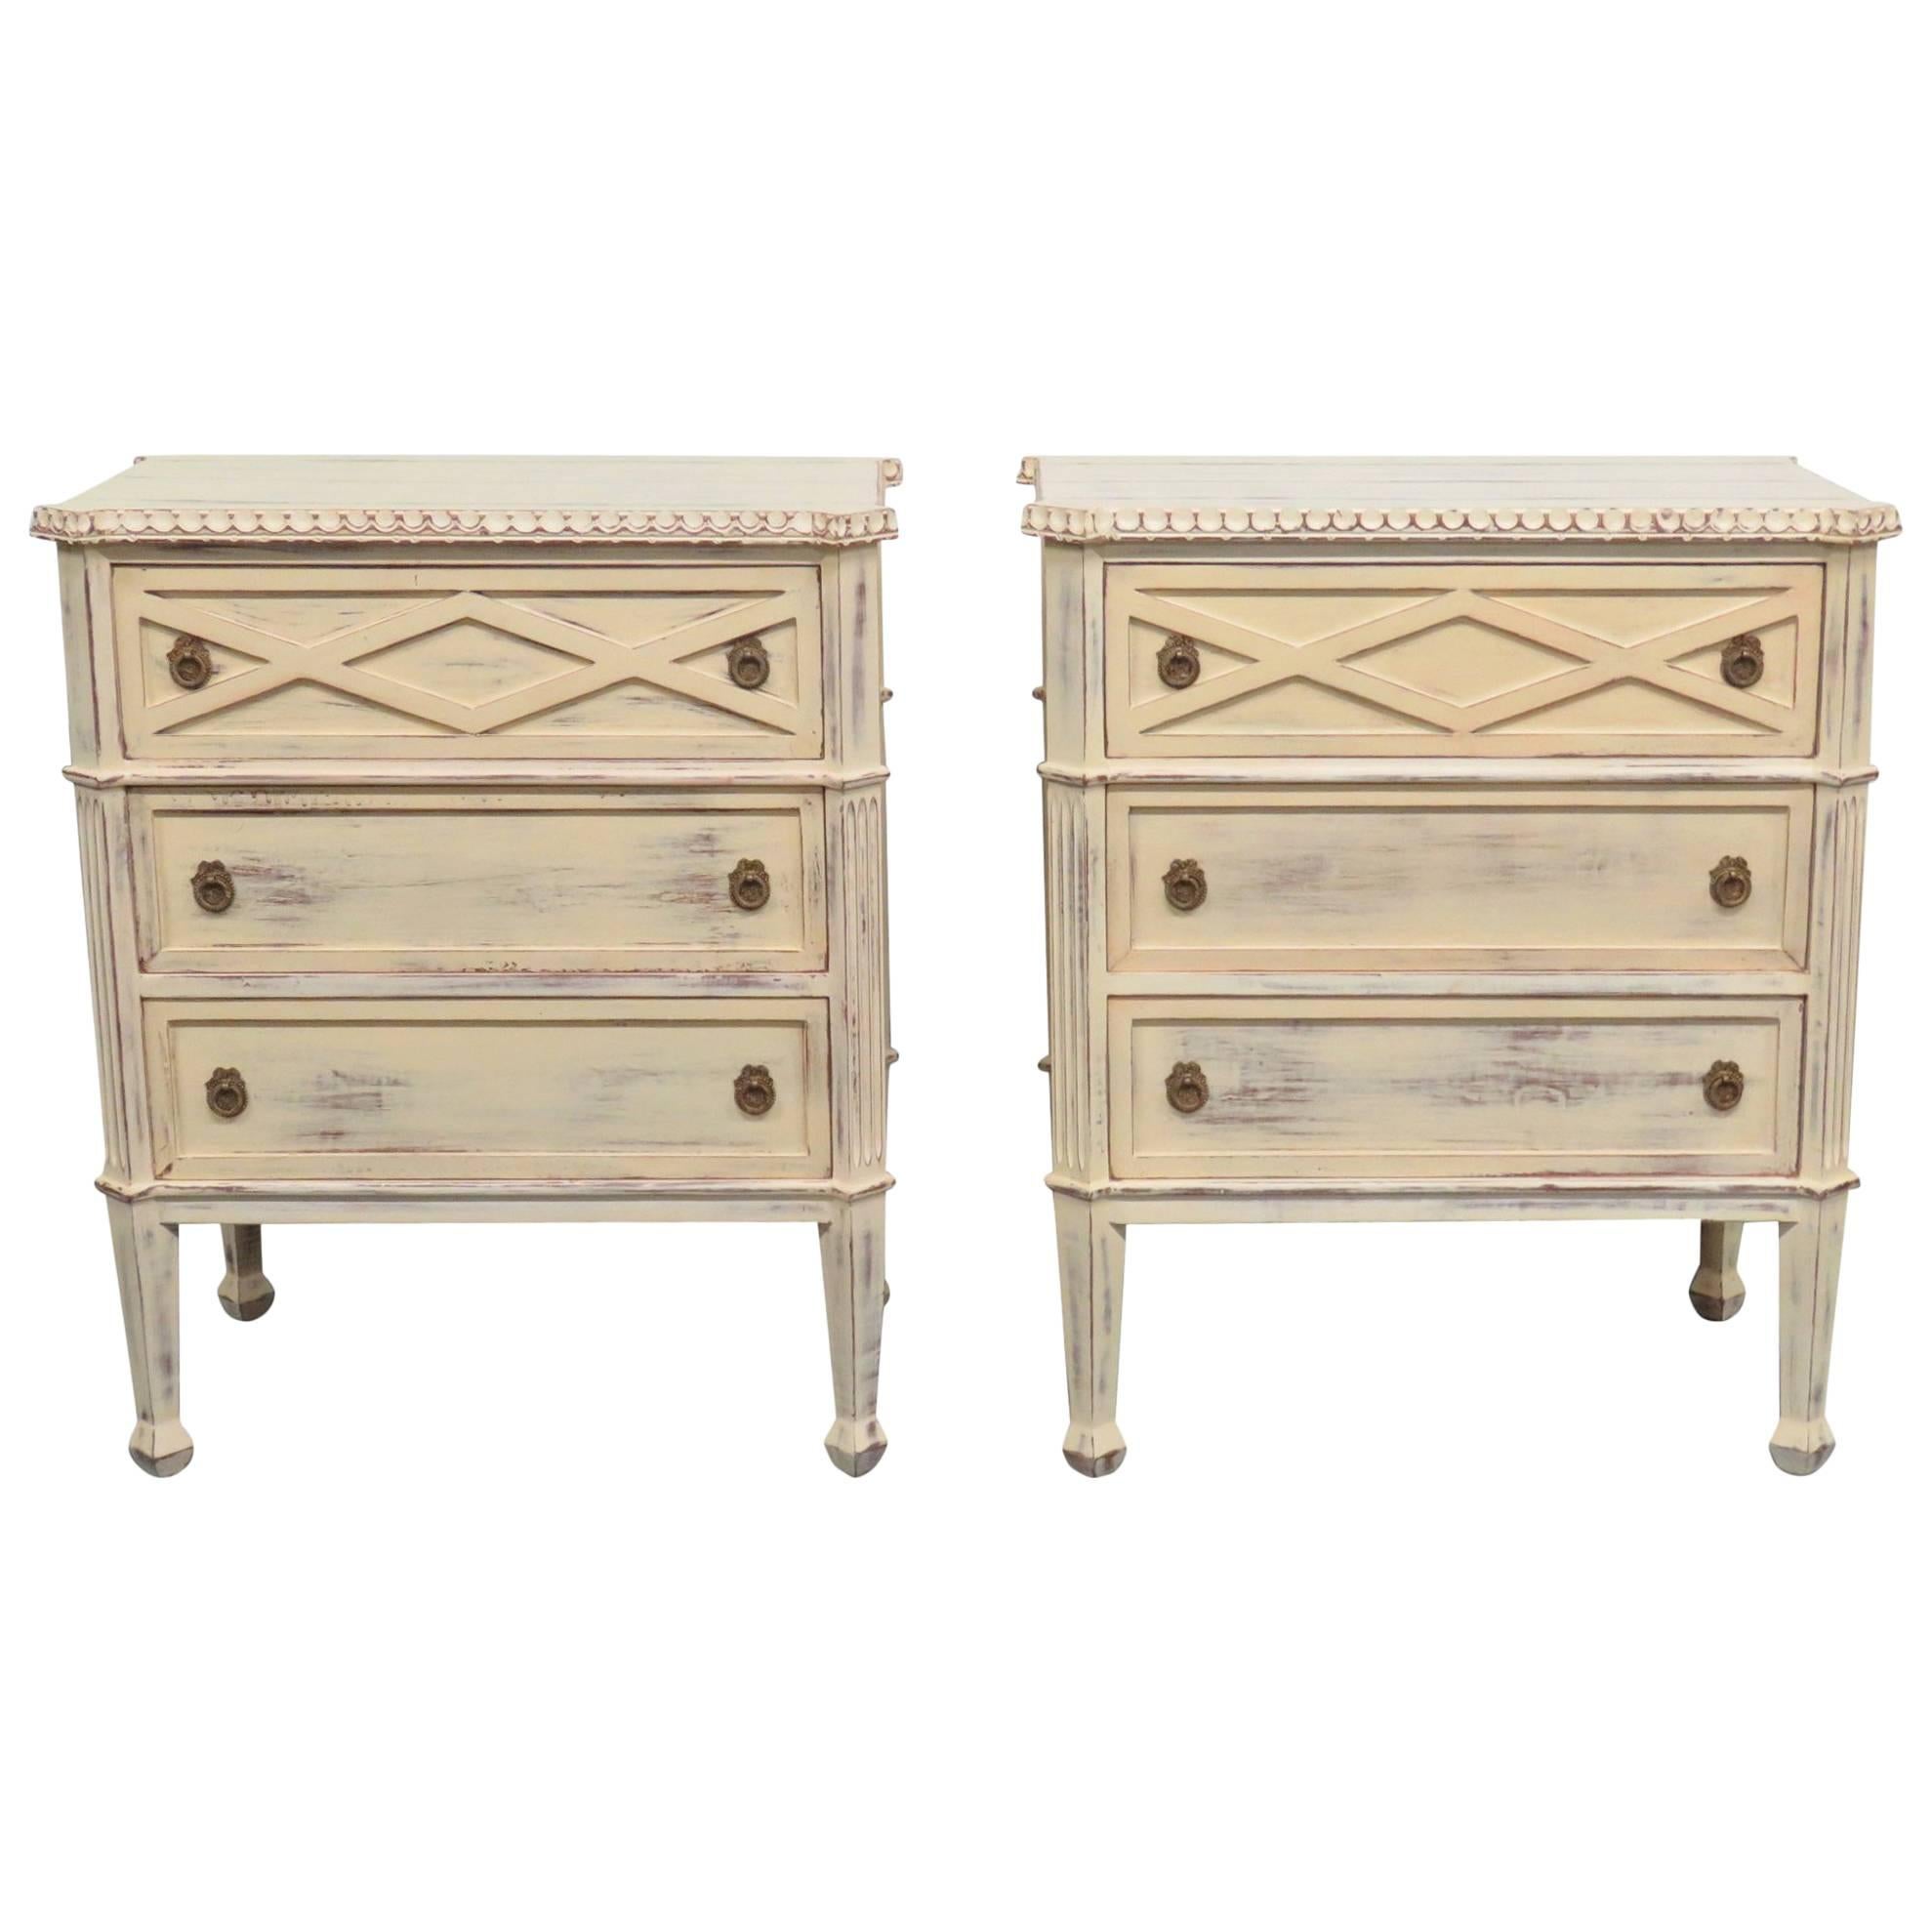 Pair Louis XVI Style Distressed Cream Painted Three-Drawer Chests